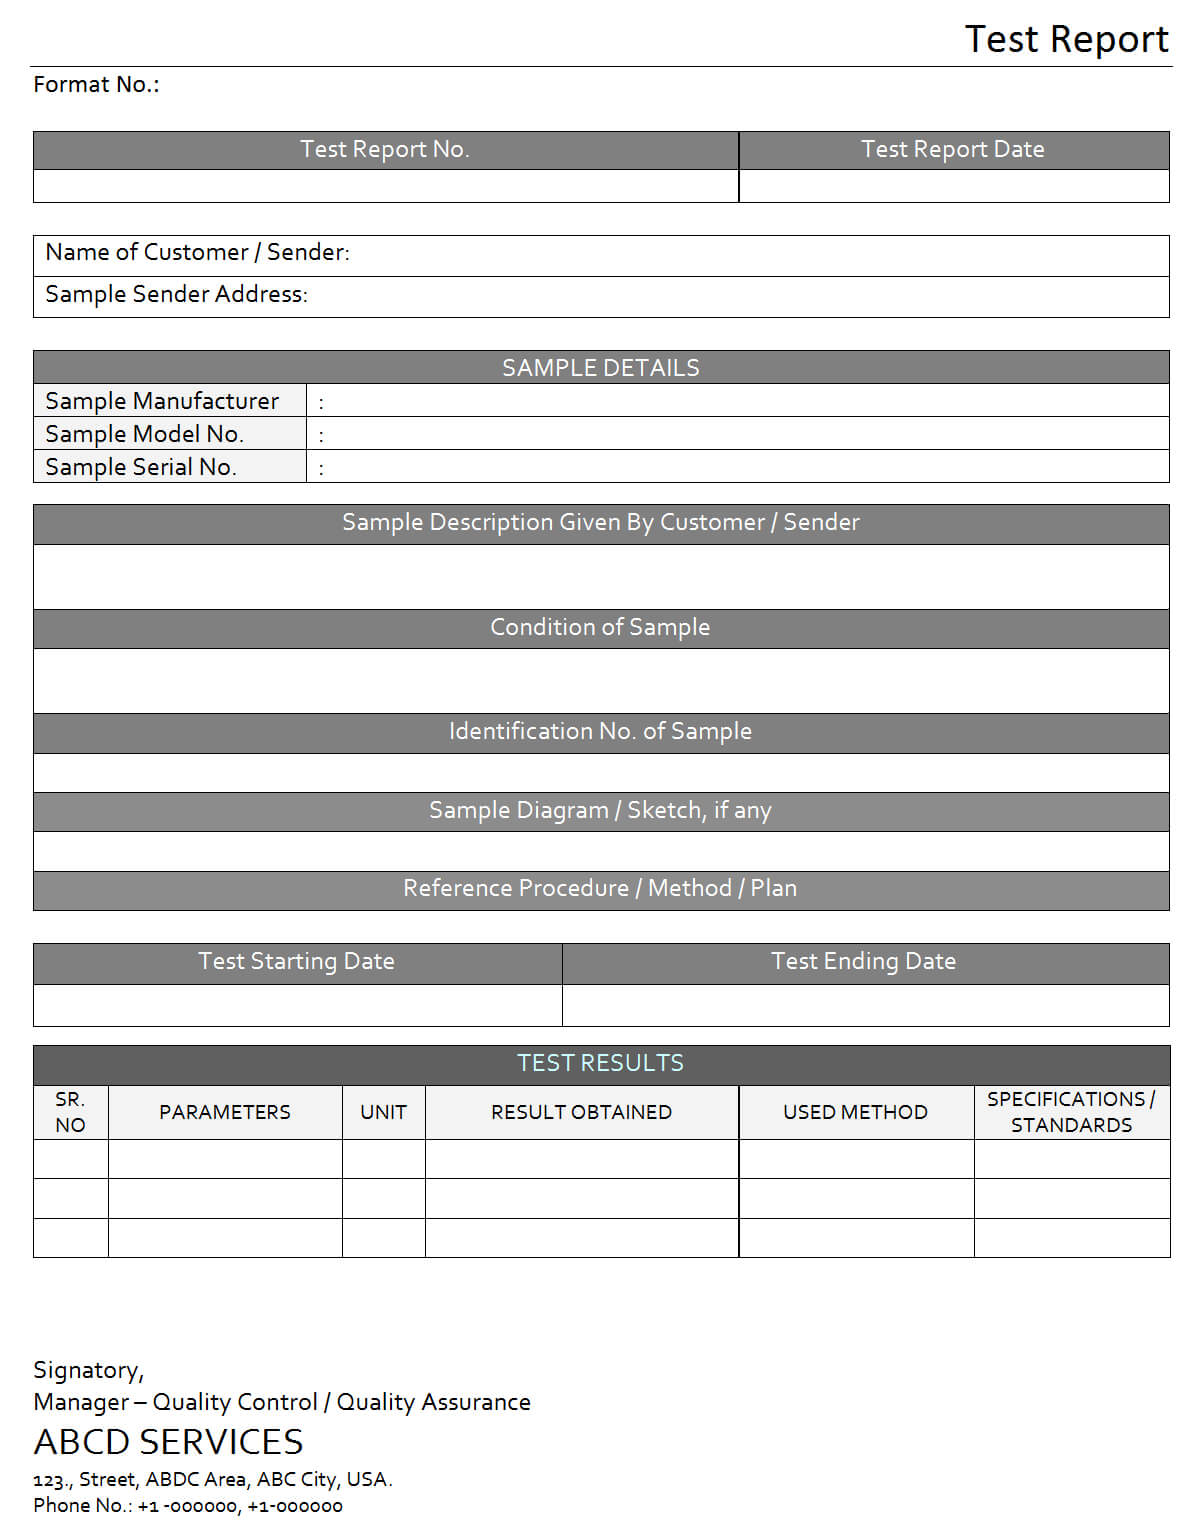 Test Report For Laboratory – Intended For Test Result Report Template